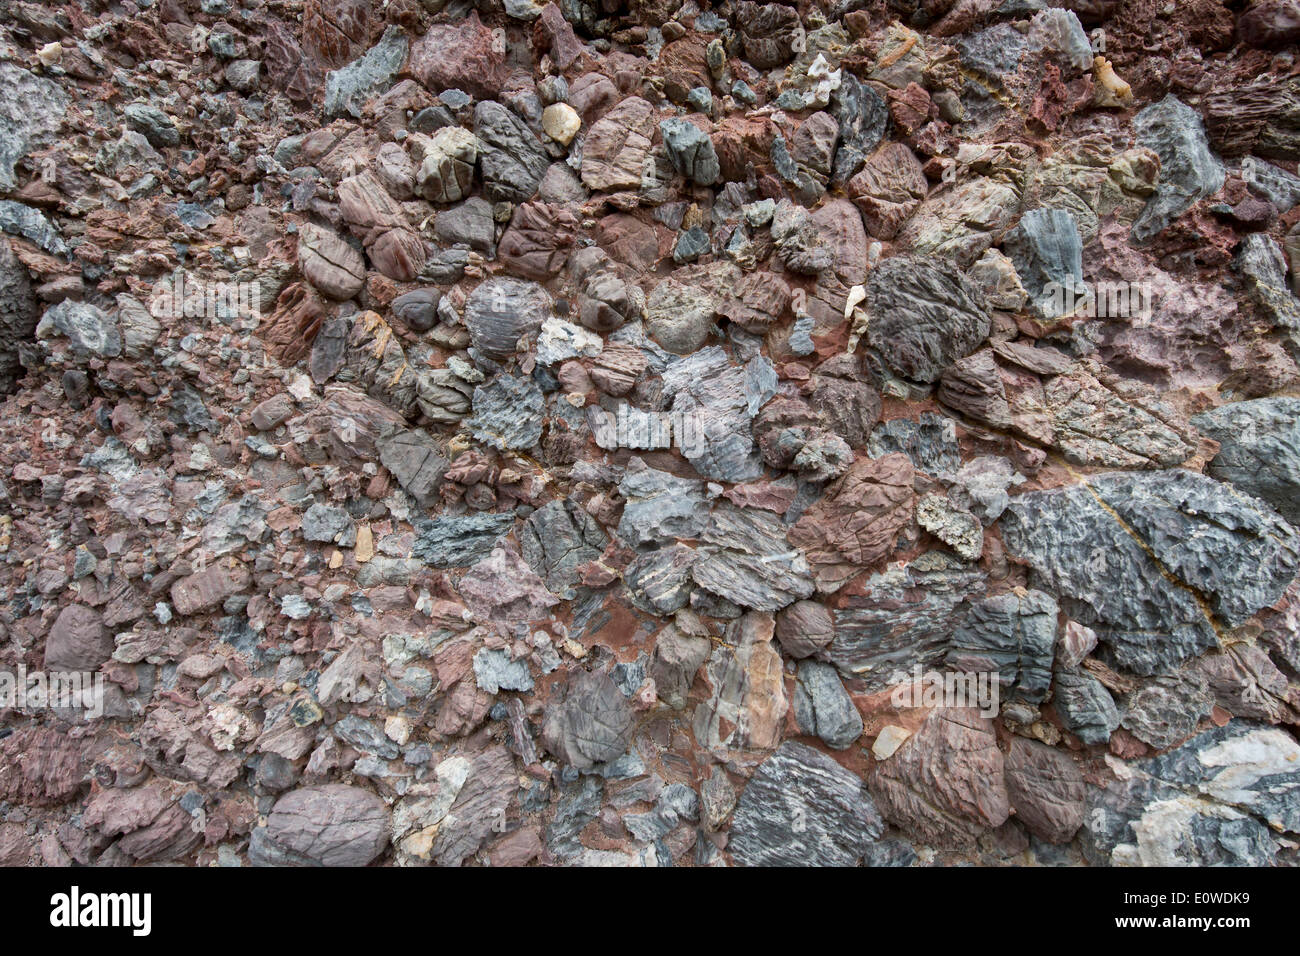 Iron oxide-containing sediment, conglomerate out of the rubble of the Caledonian mountain range, known as Old Red Stock Photo